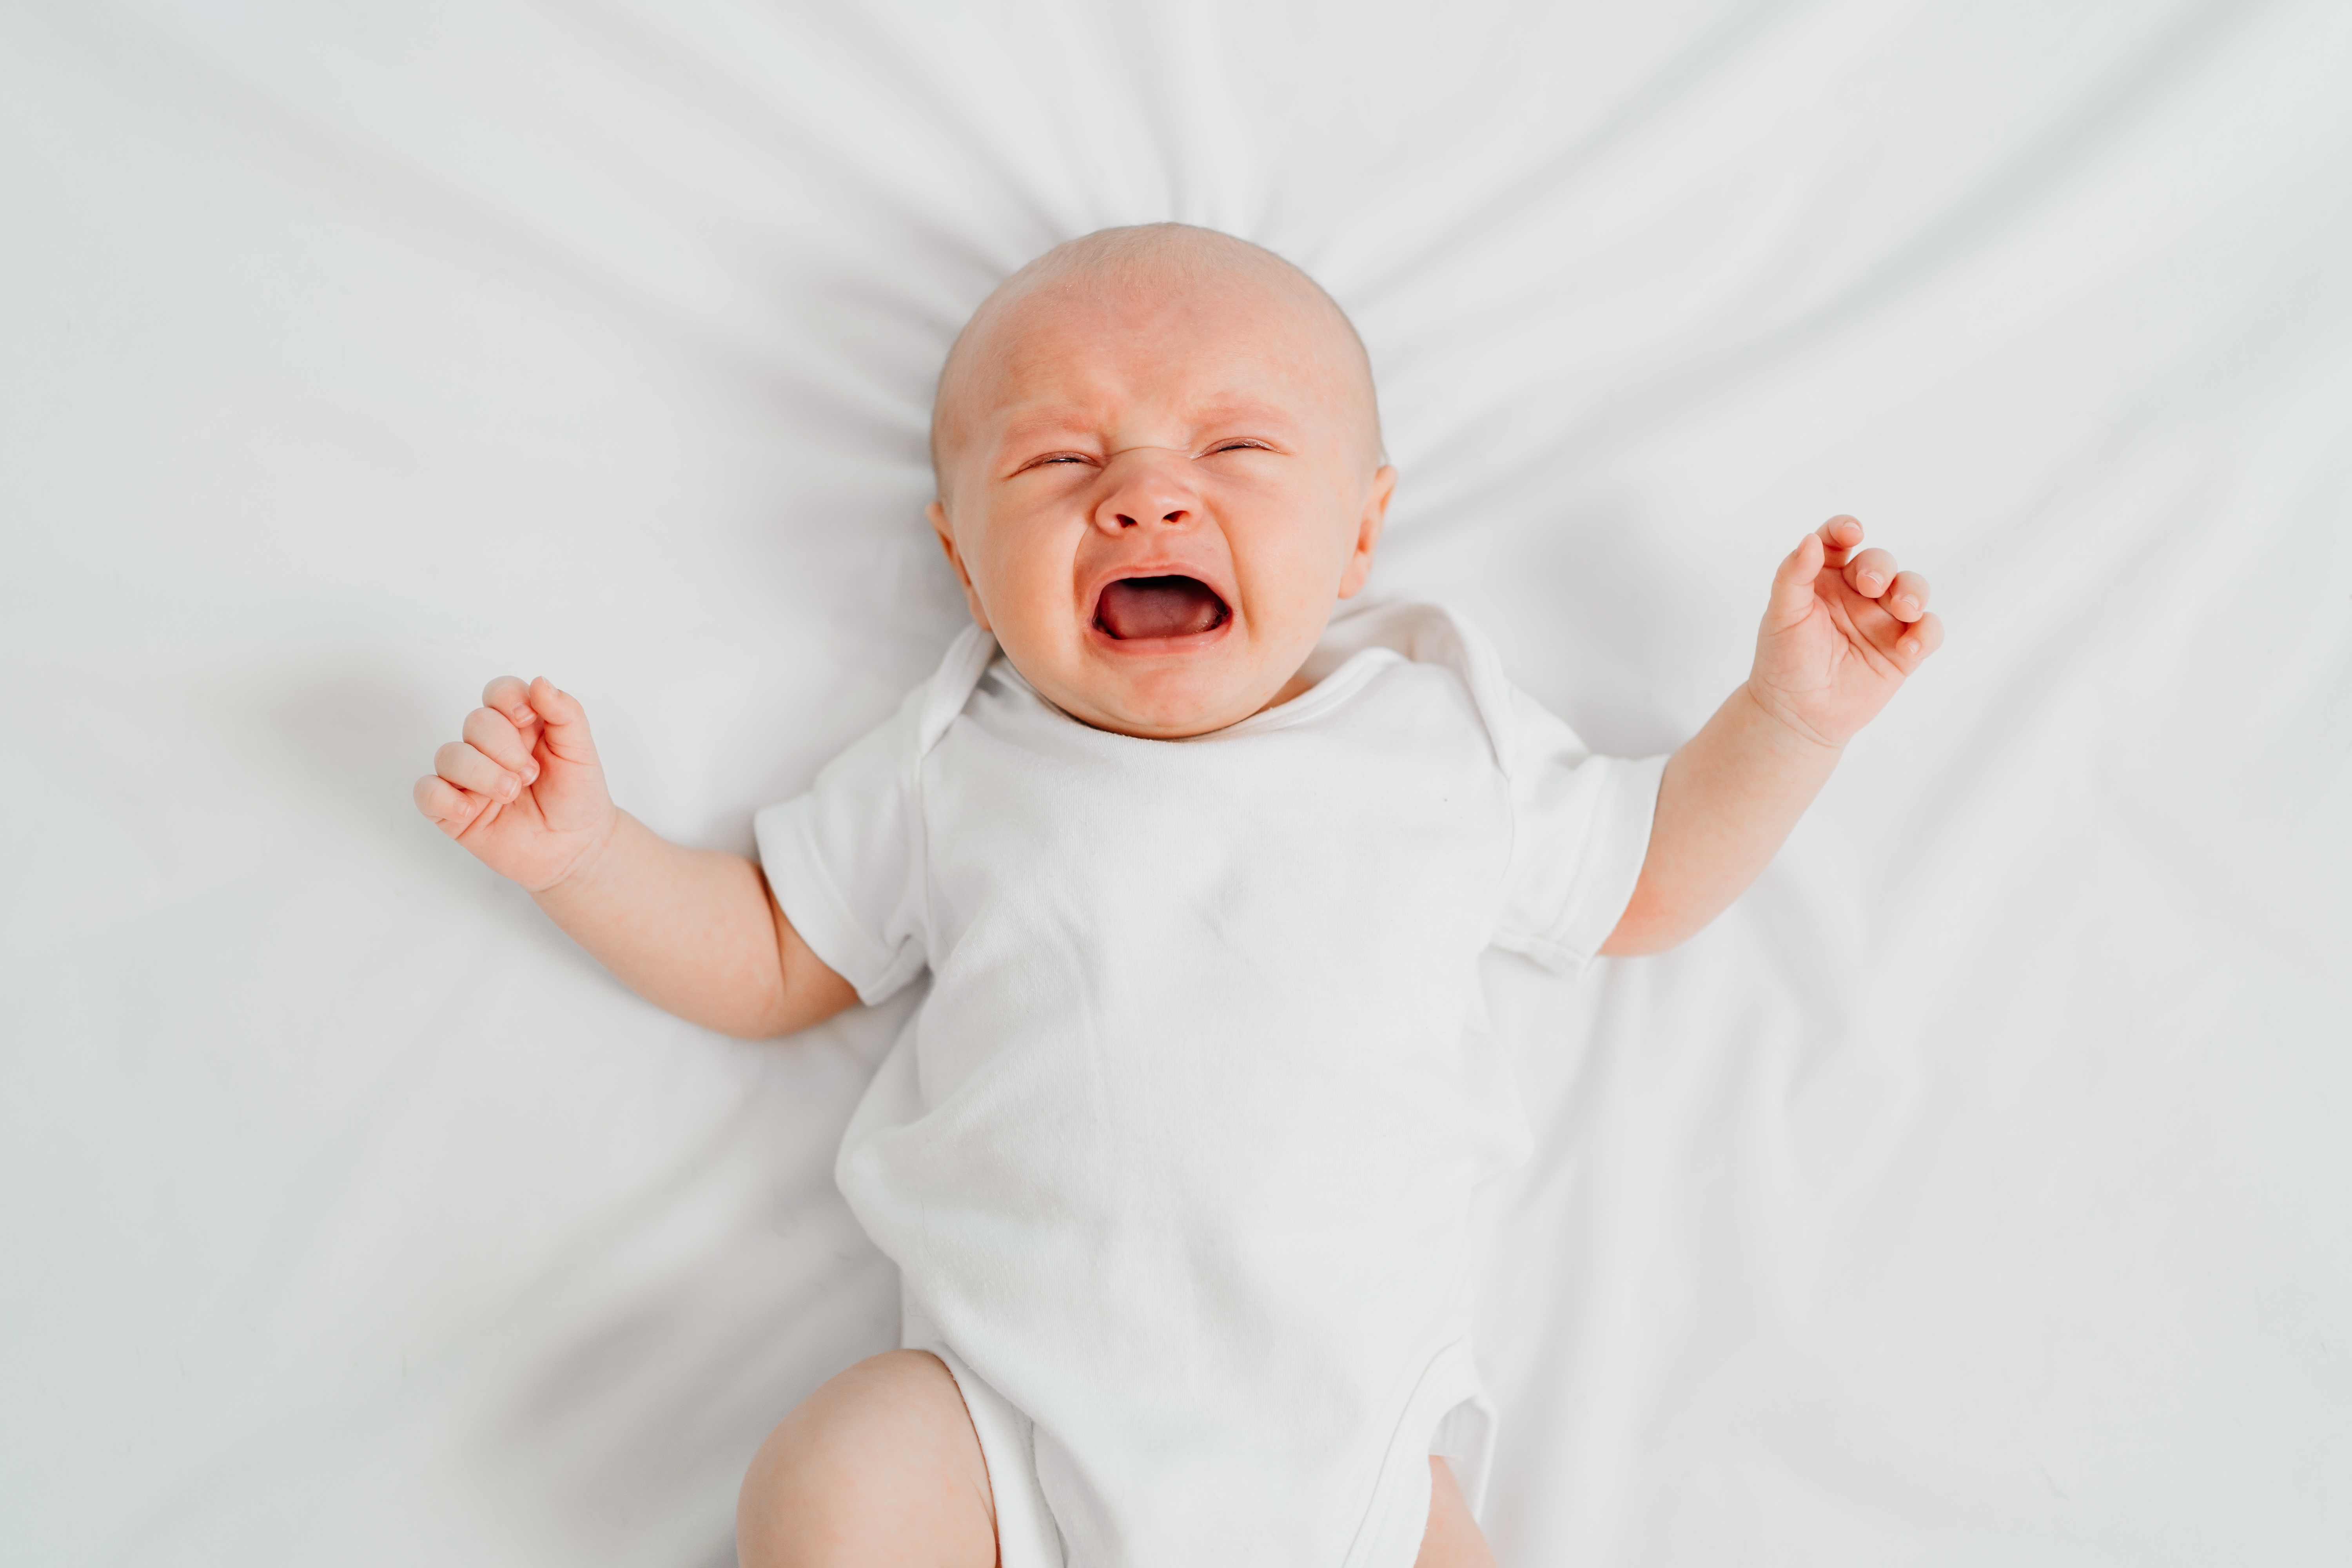 A crying baby | Source: Shutterstock